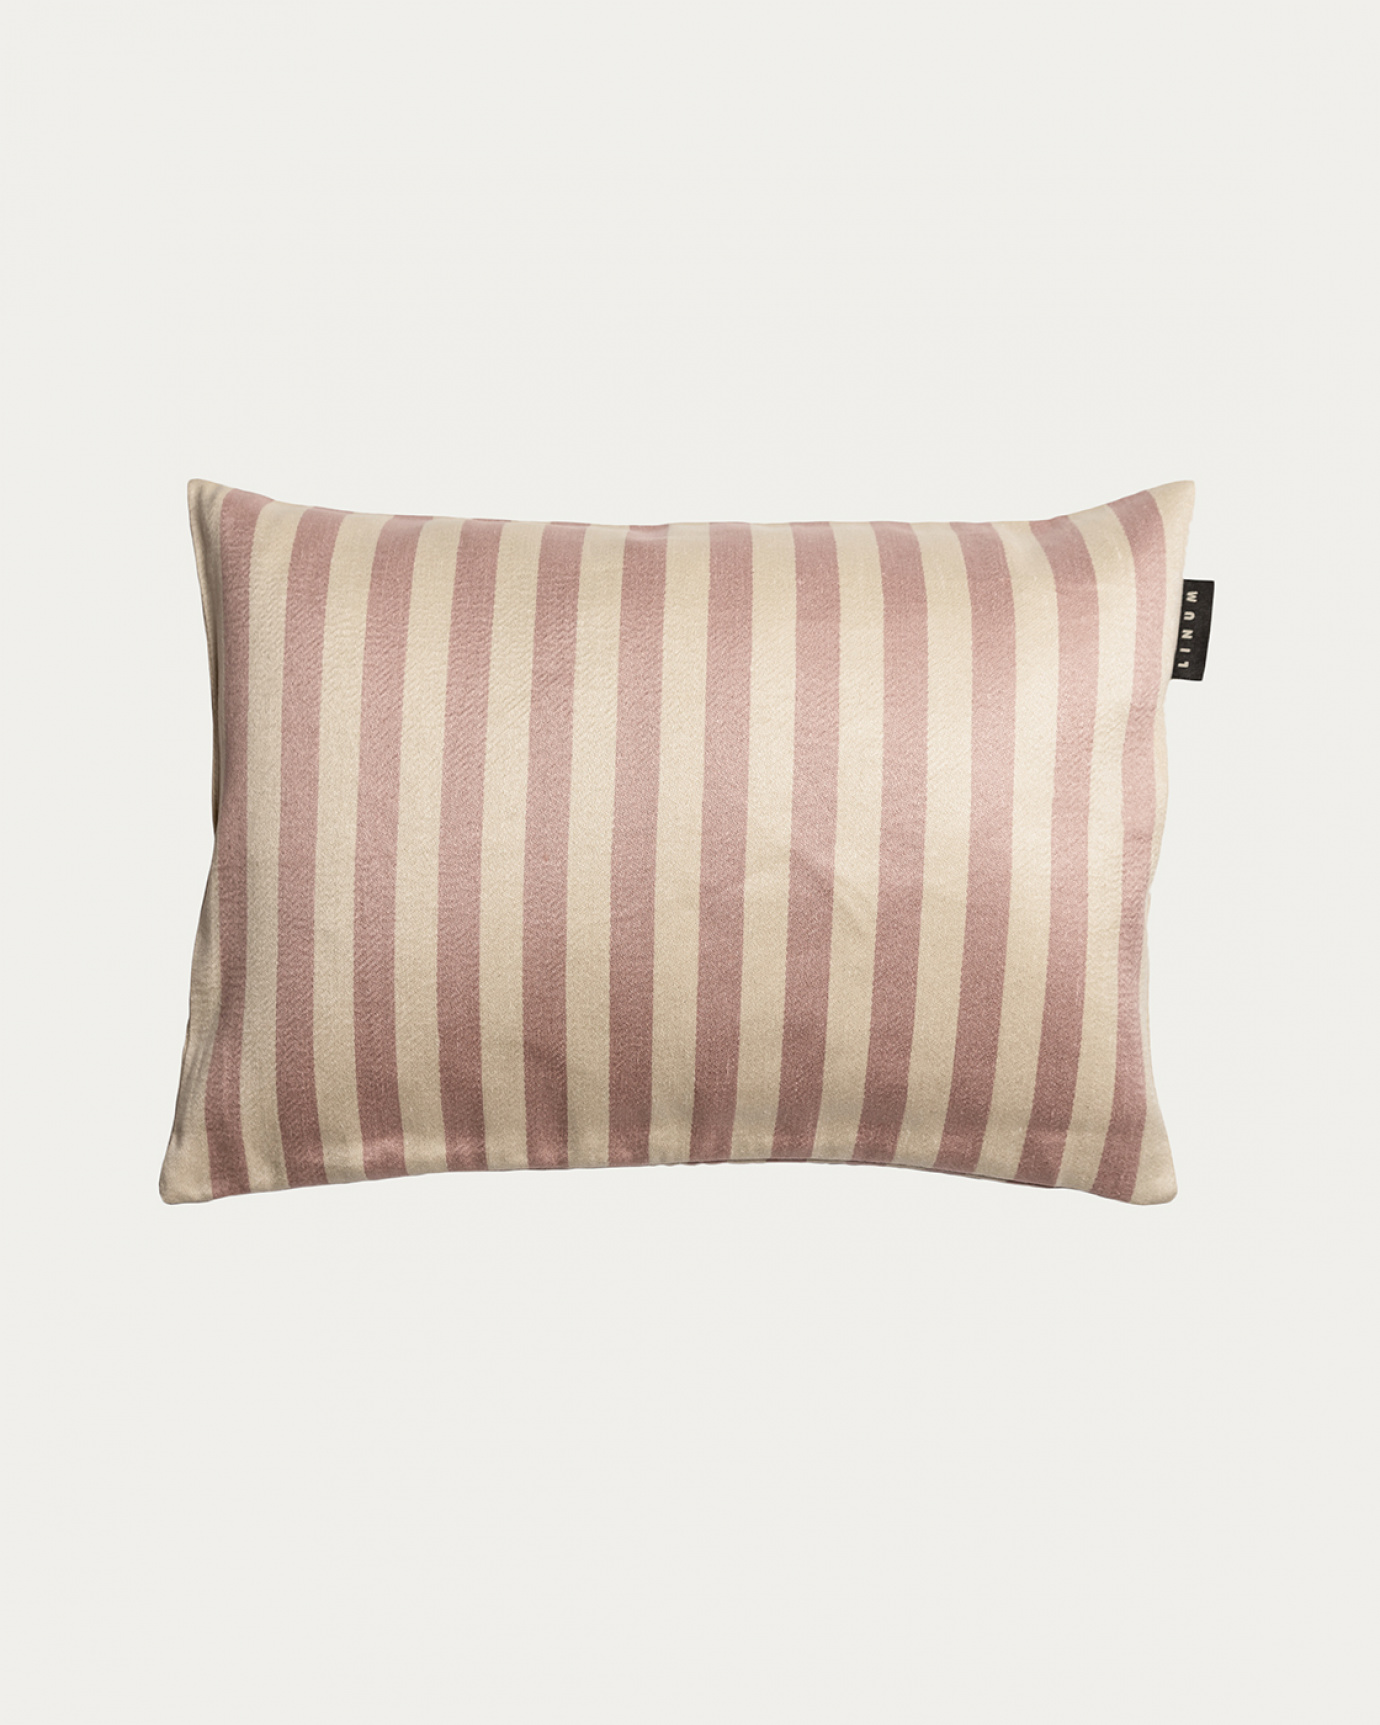 Product image dusty pink AMALFI cushion cover with wide stripes made of 77% linen and 23% cotton from LINUM DESIGN. Size 35x50 cm.